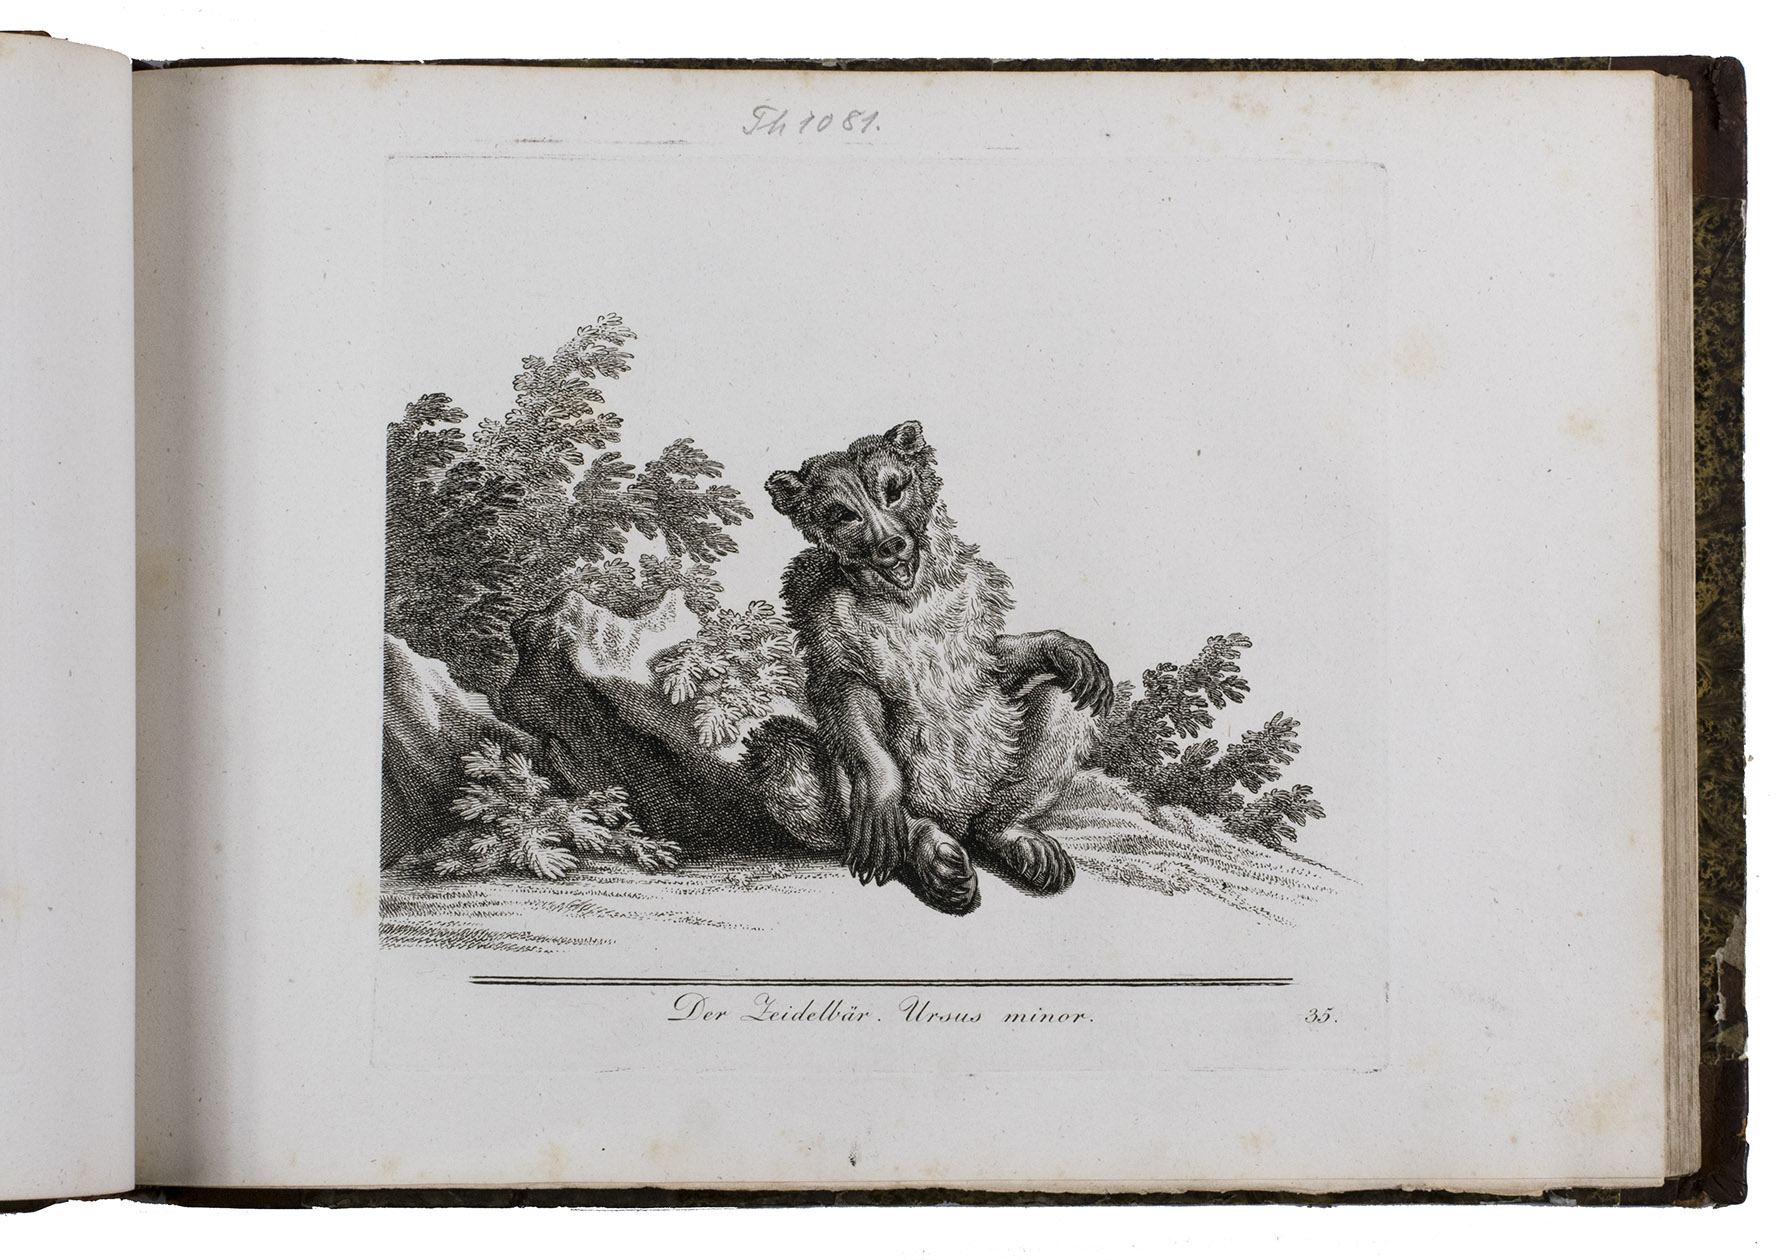 RIDINGER, Johann Elias. - [Naturhistorisches Original-Thierwerk].[Augsburg, Engelbrecht, 1825]. Oblong folio. With 127 numbered engraved plates including frontispiece incorporating a small portrait of Johann Elias Ridinger (1698-1767) in profile on a base with his name and profession, surrounded by animals, and plates showing all kinds of animals classified in 9 (of 10) sections. Lacking the title-page and part of the text, but with all plates complete. Contemporary diced half calf, gold-tooled spine, marbled sides.